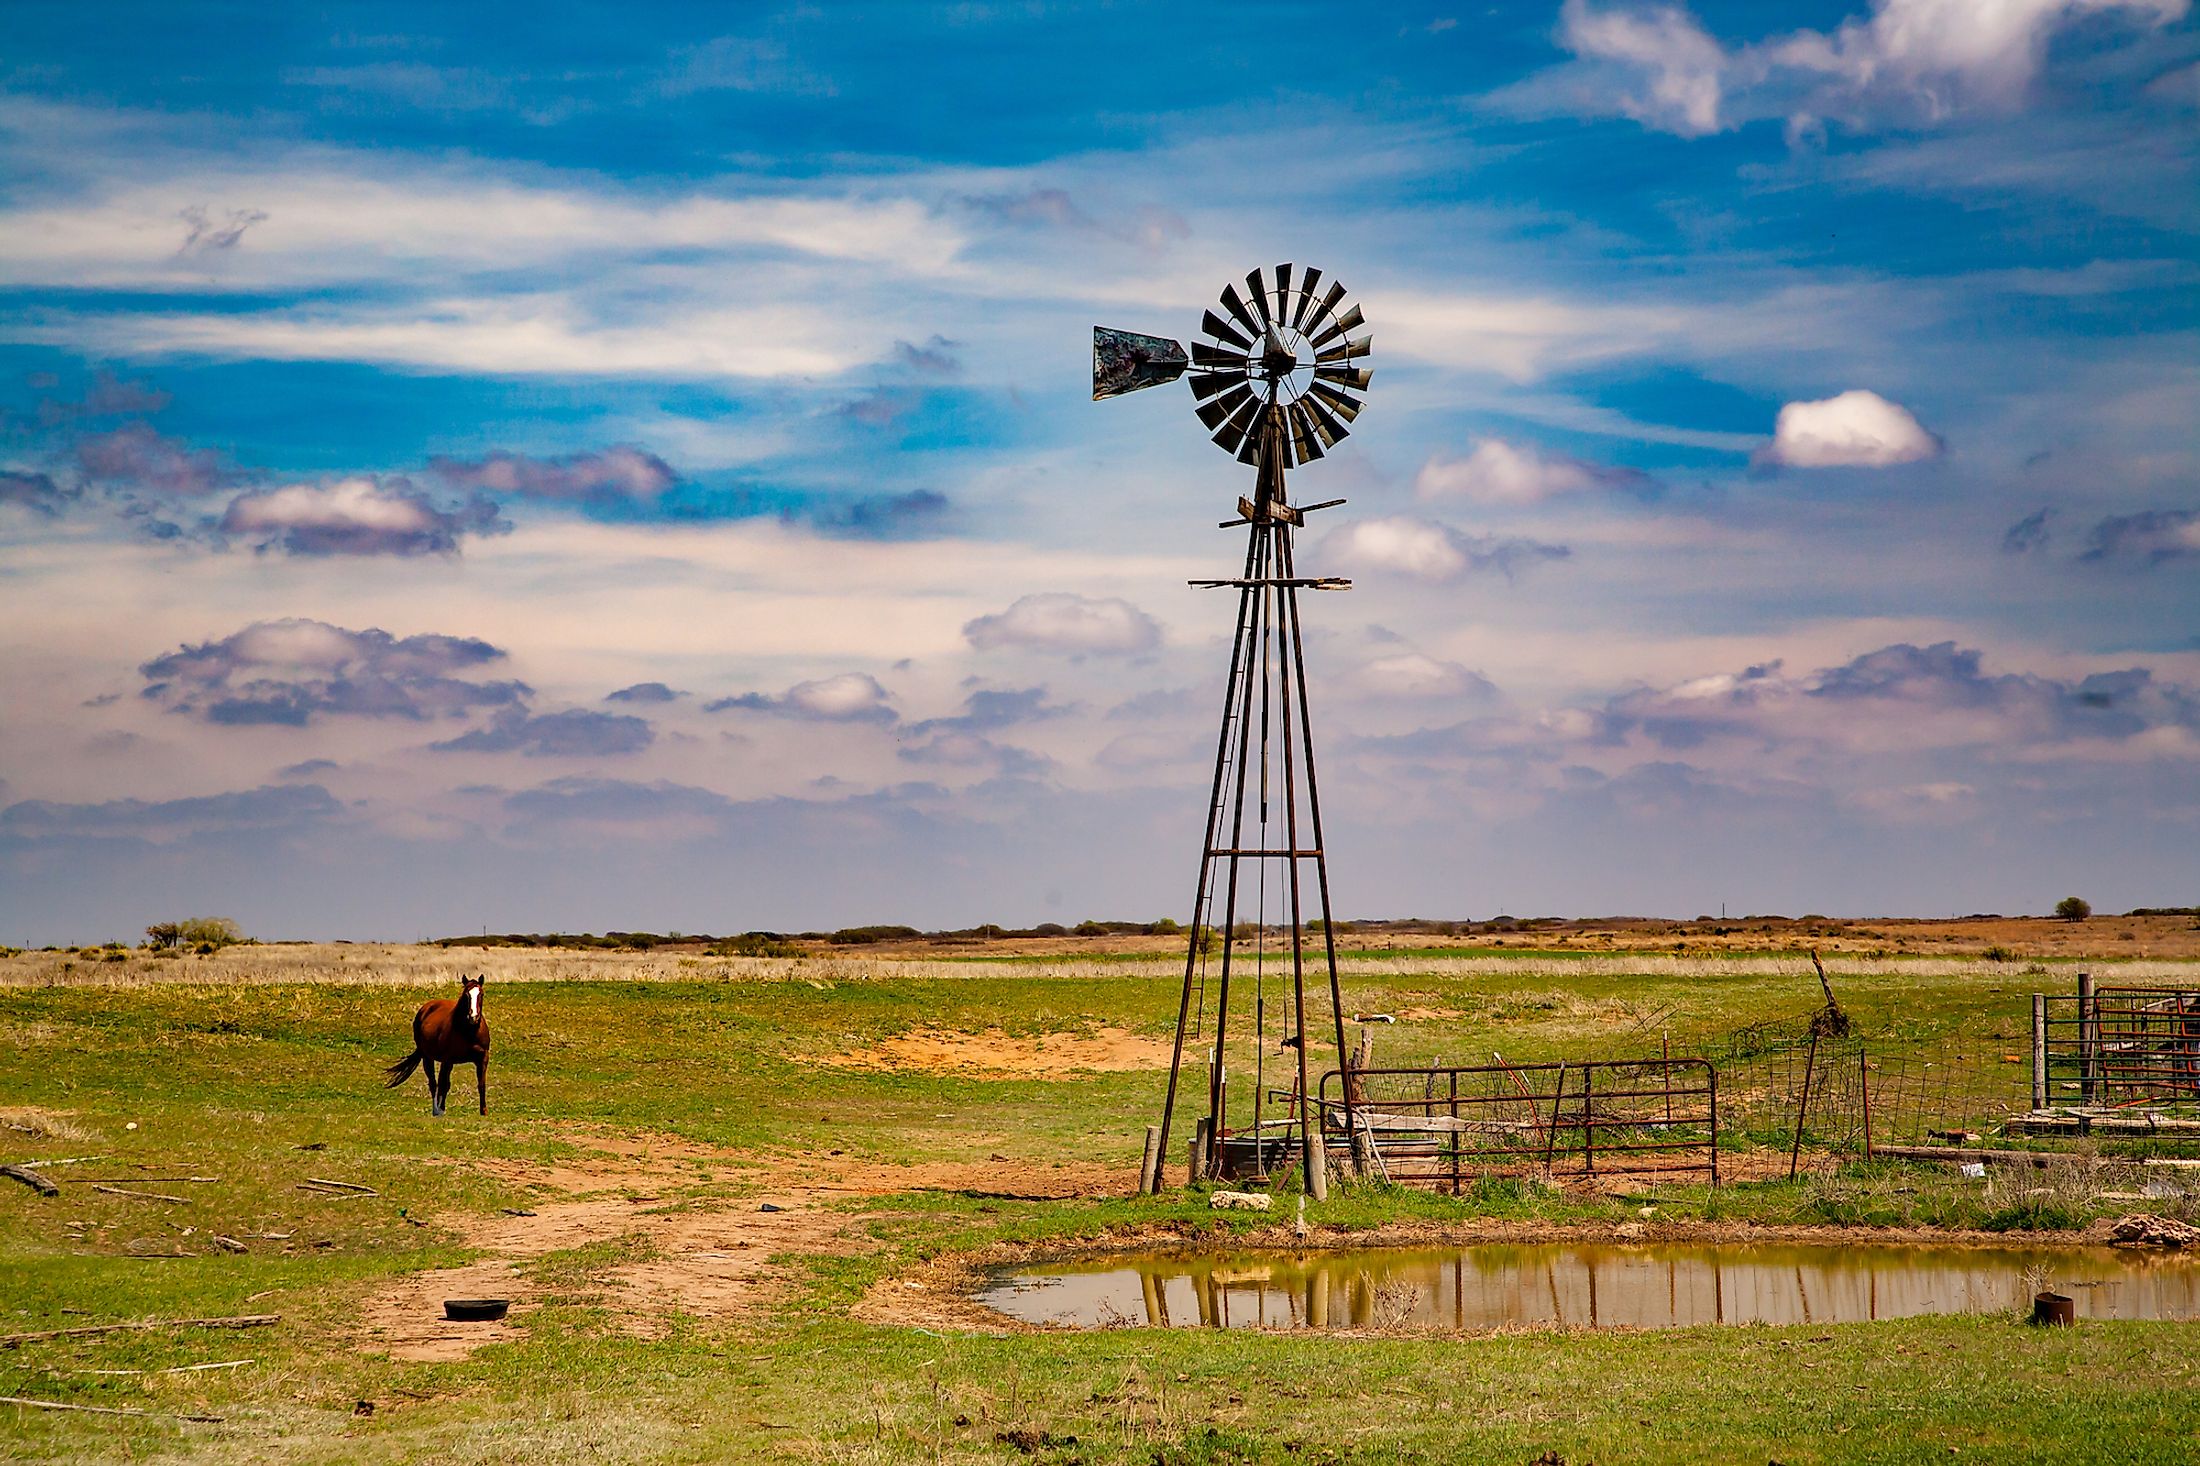 A scene from the Oklahoma Panhandle